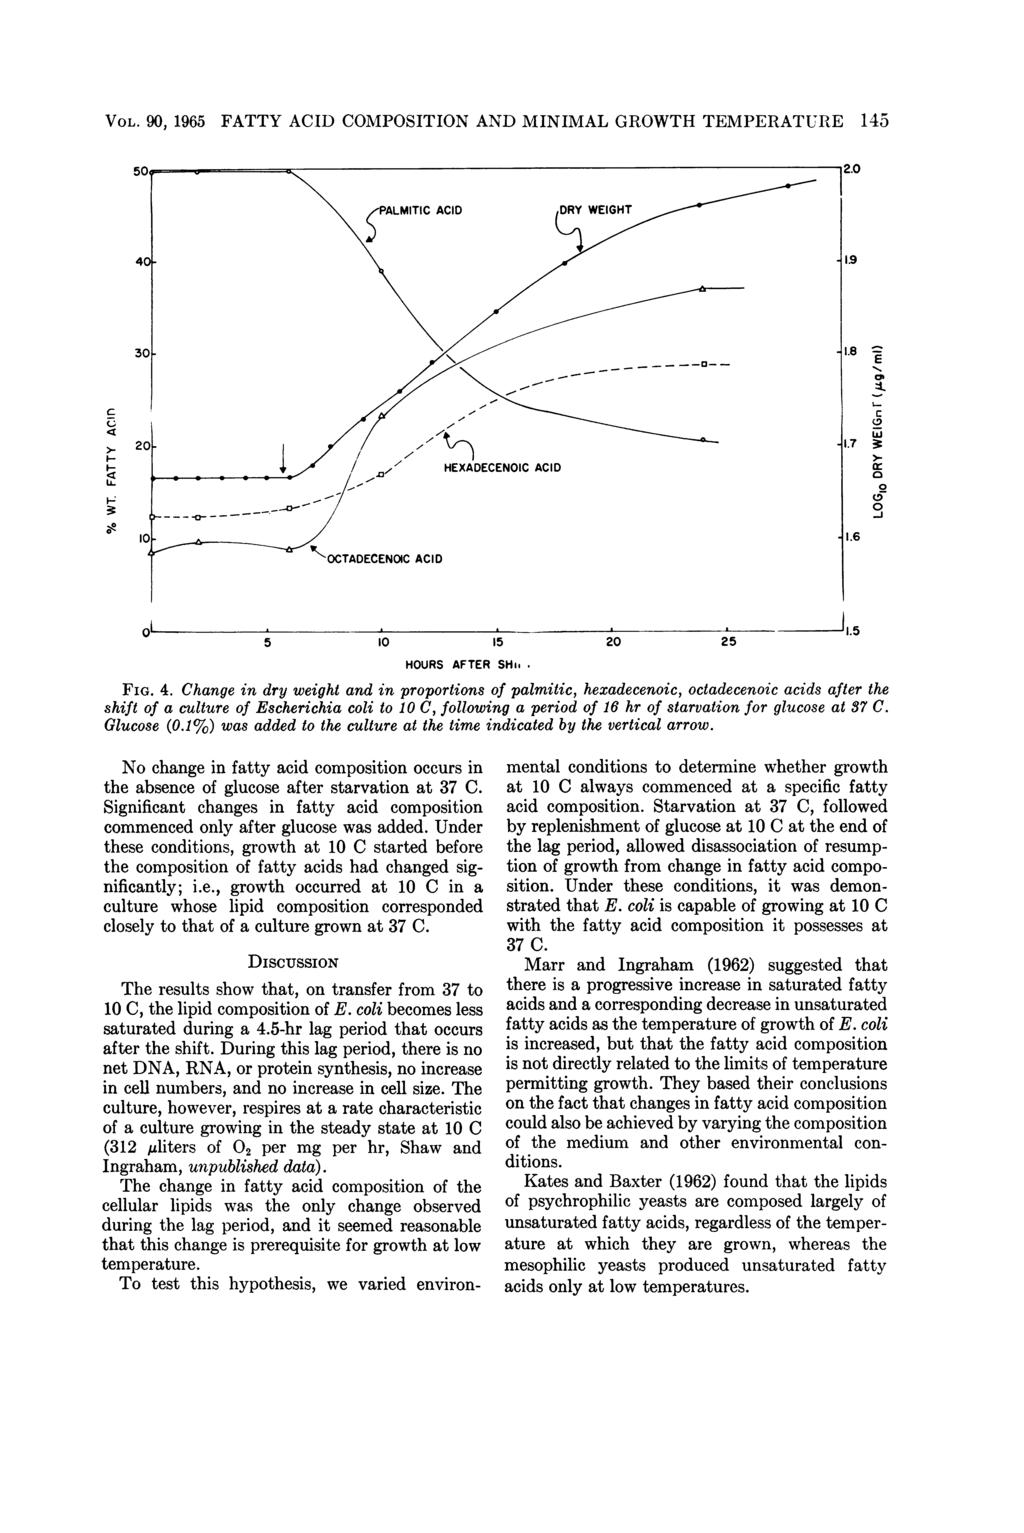 VOL. 9, 1965 FATTY ACID COMPOSITION AND MINIMAL GROWTH TEMPERATURE 145 E; F- 3: 5 1 15 2 HOURS AFTER SHil FIG. 4.